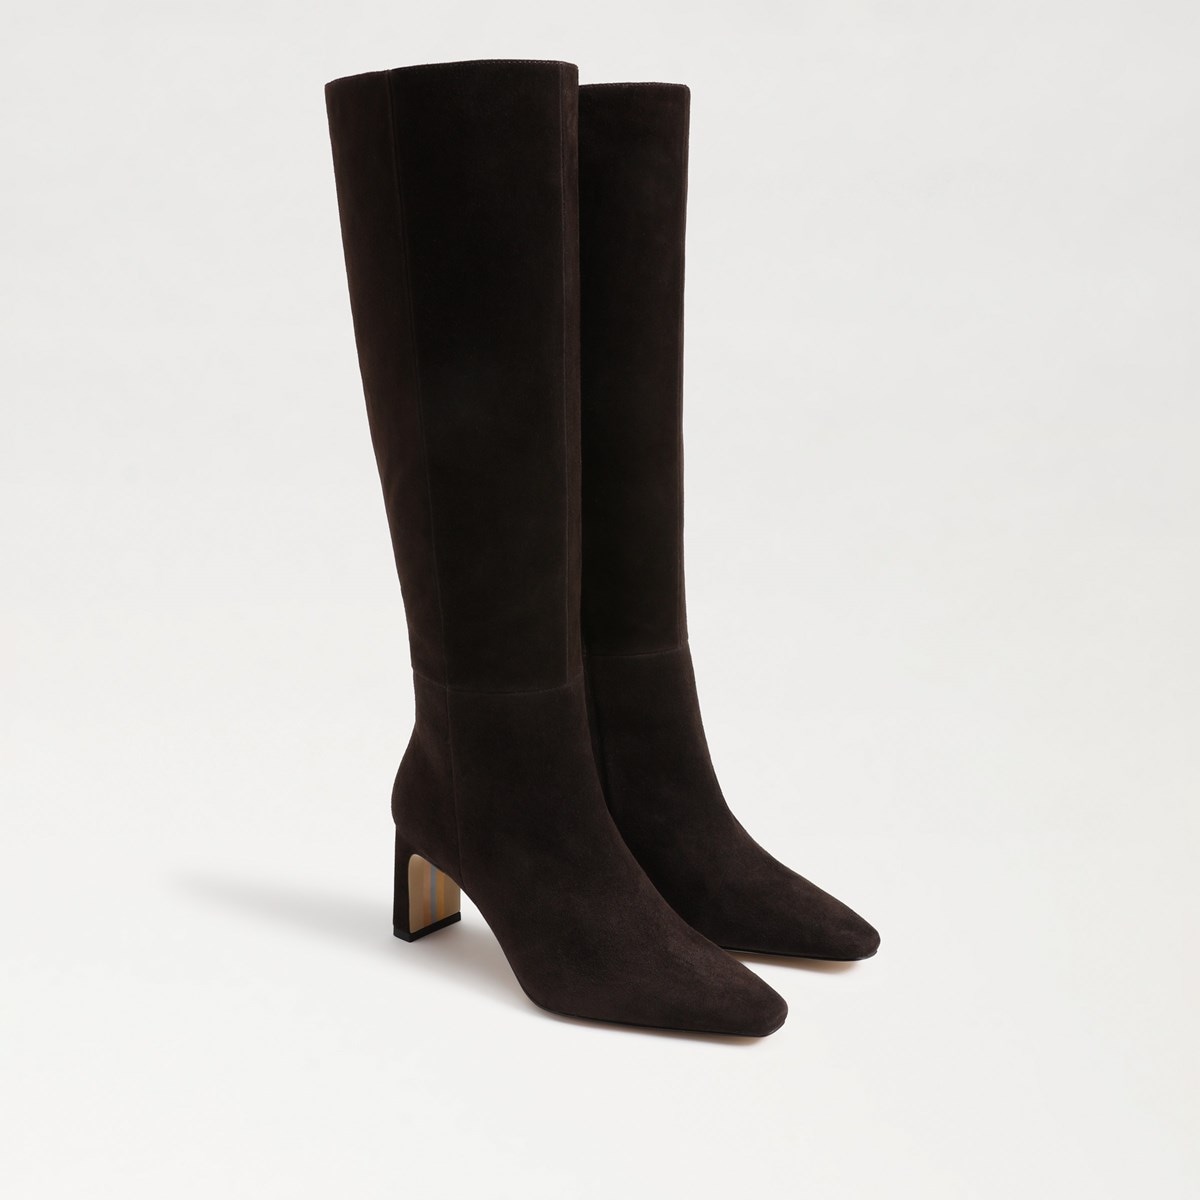 Click for more info about Sylvia Knee High Boot